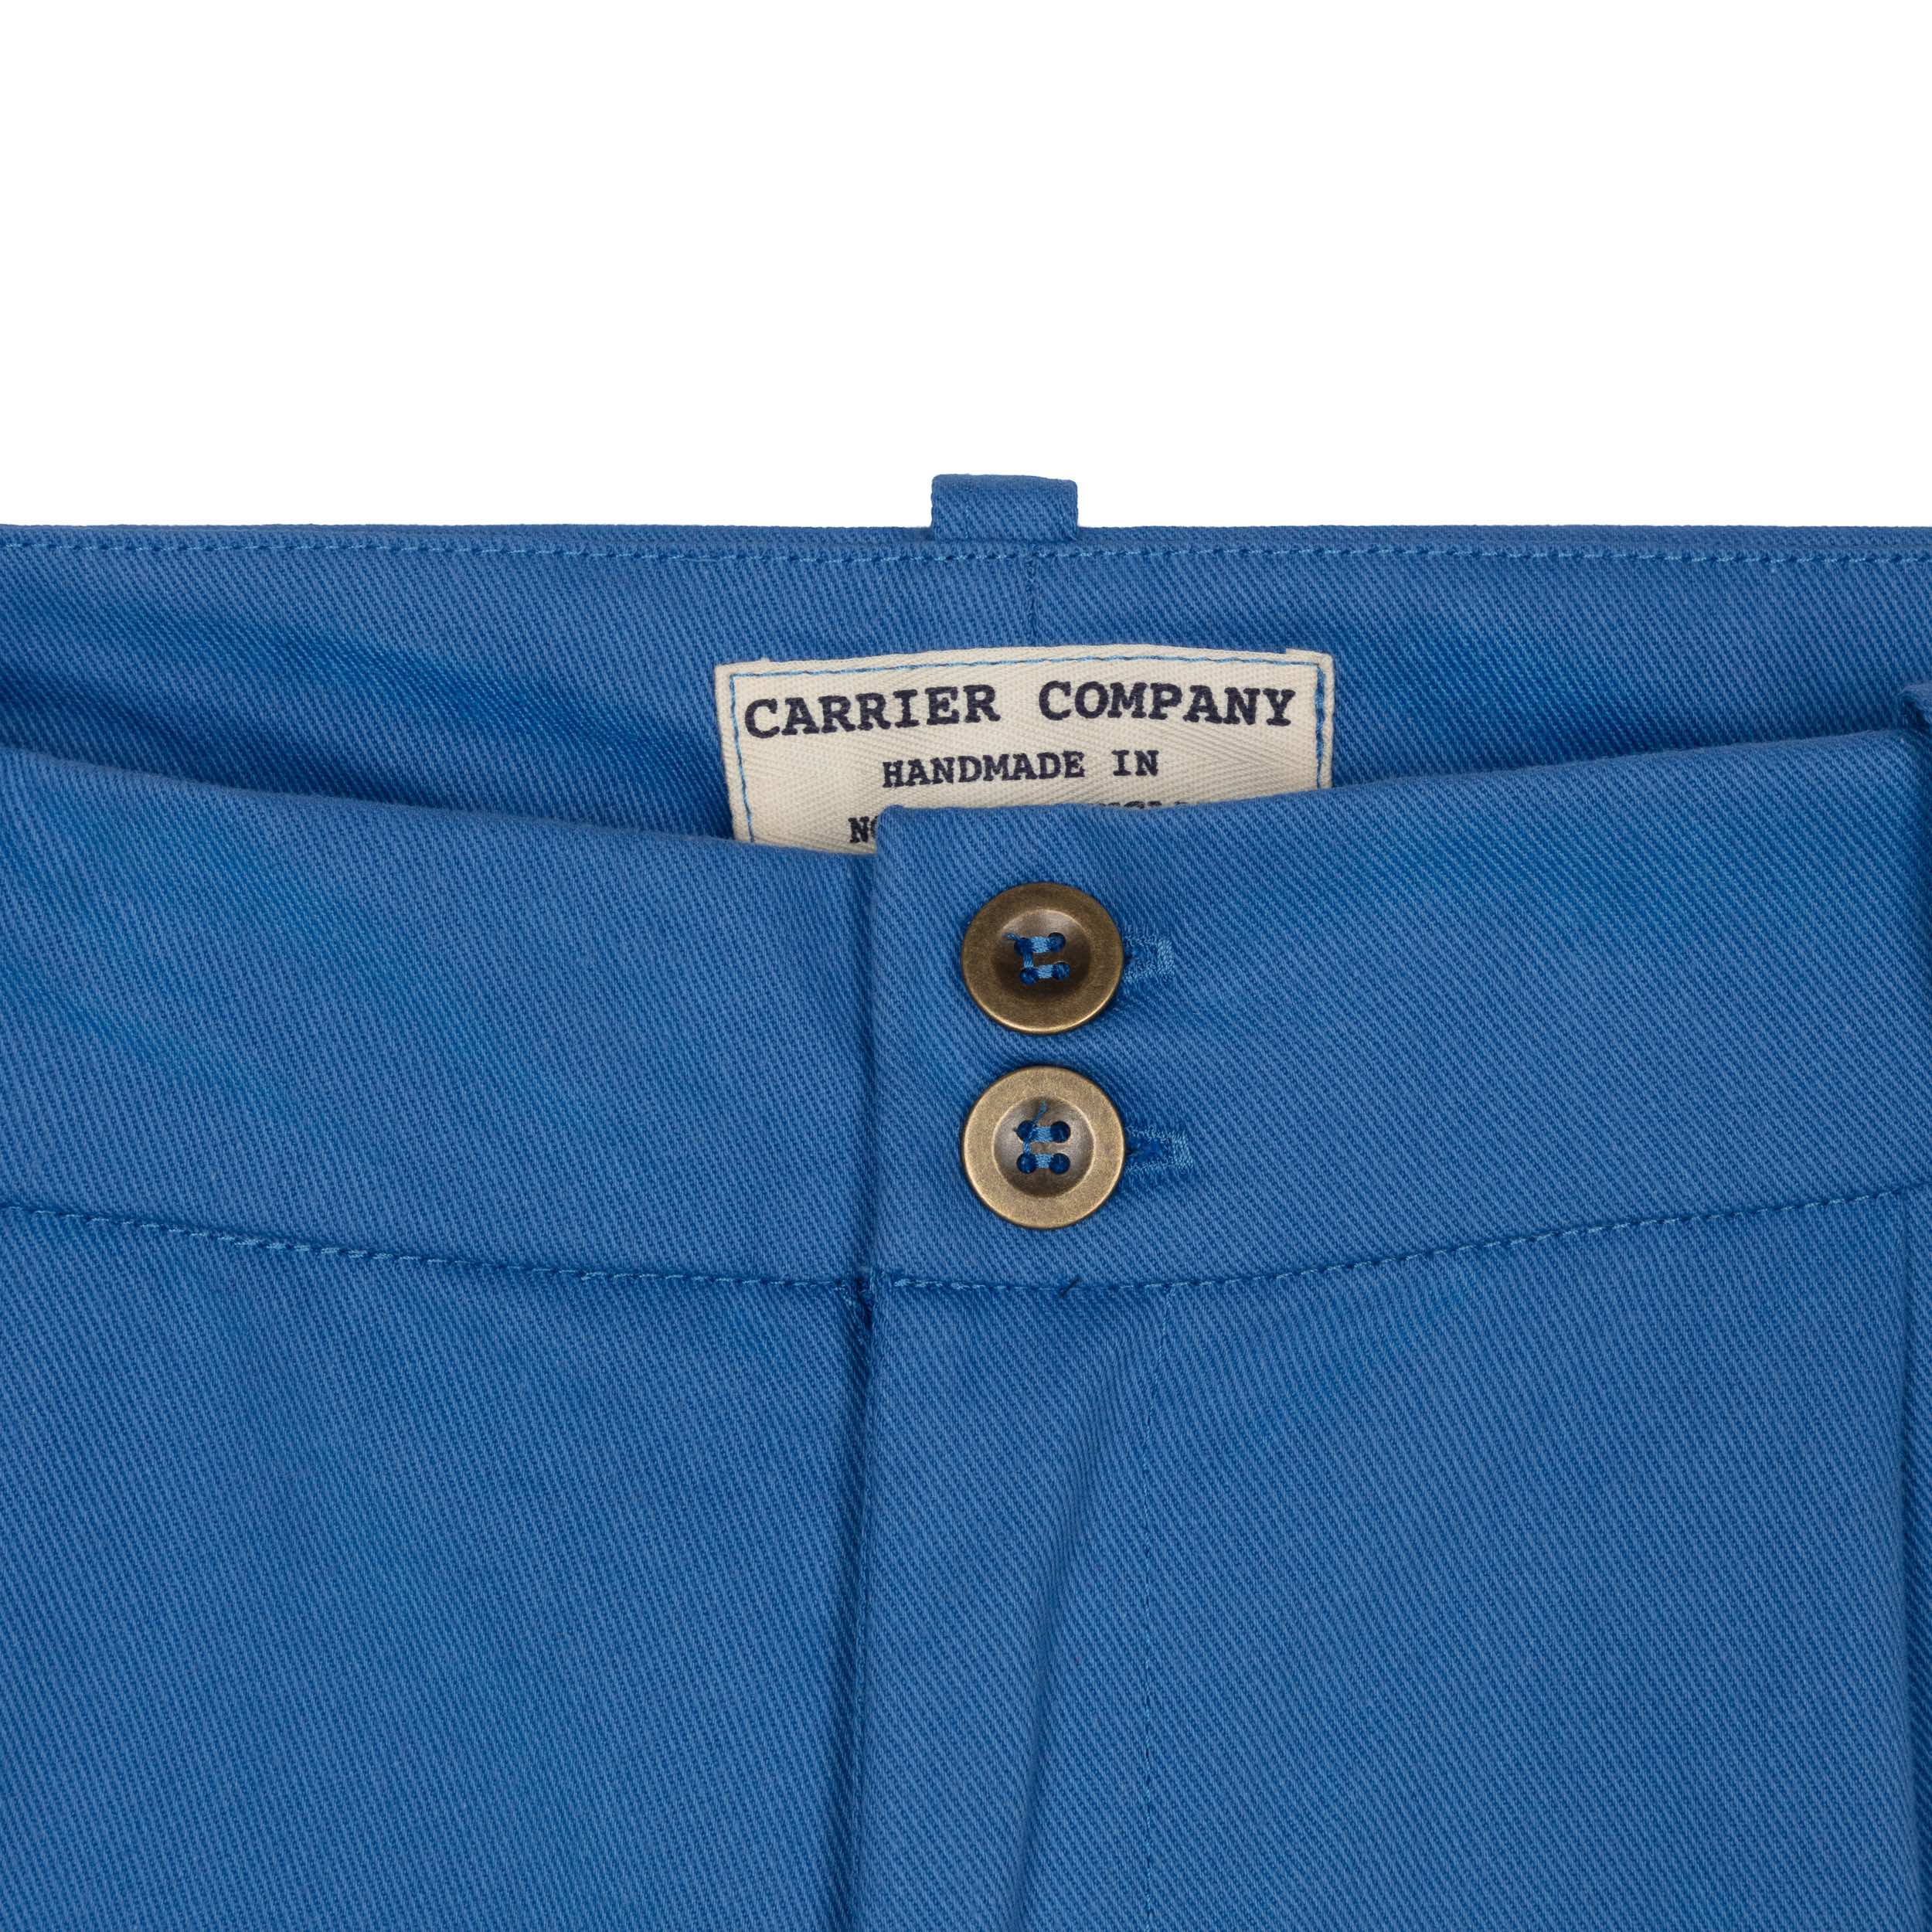 Carrier Company Dutch trouser in Sky Cotton Drill